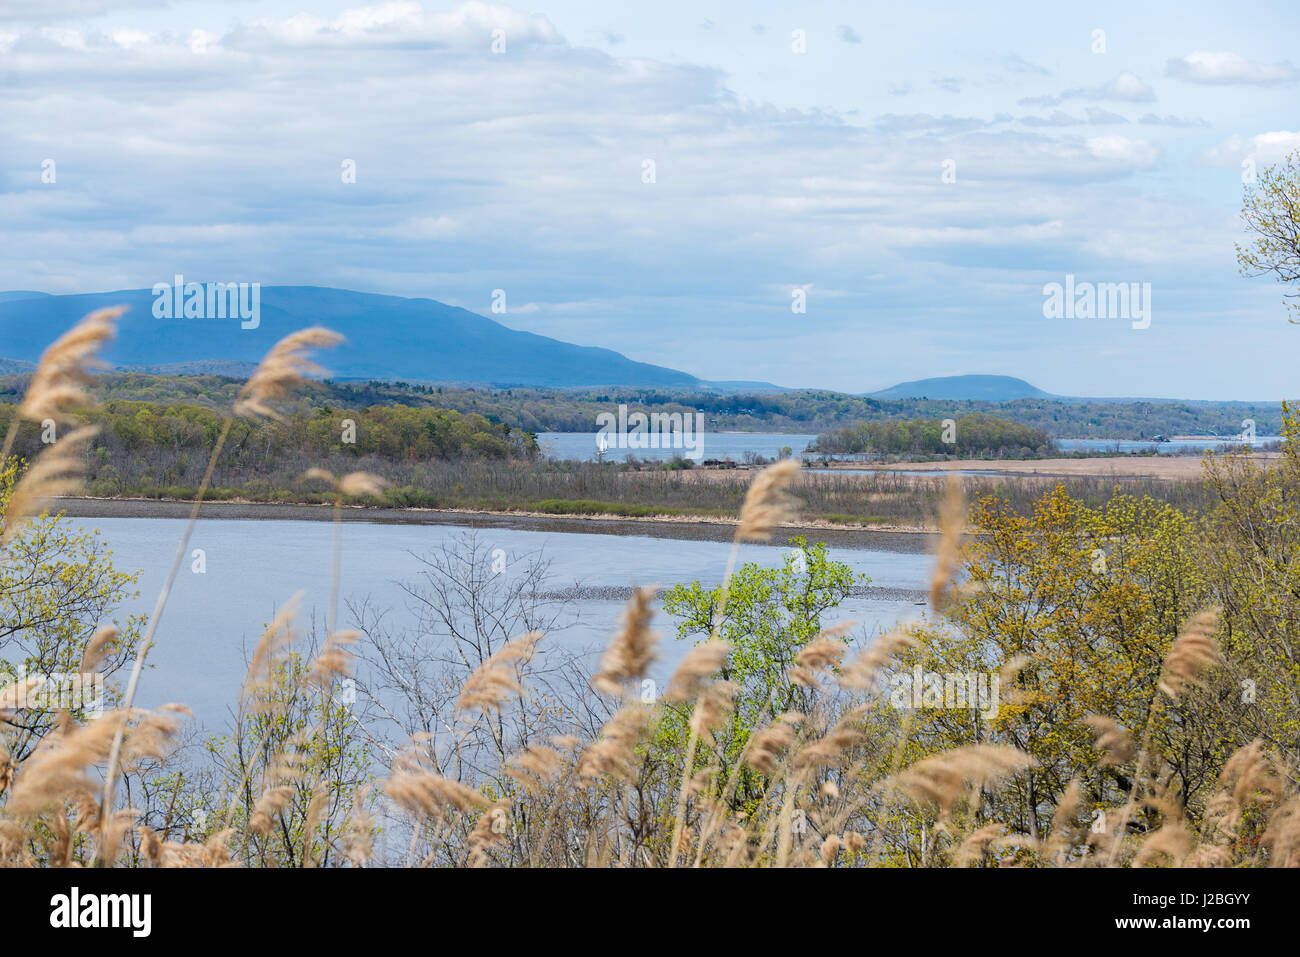 View of Catskill Mountains and Hudson River near Rhinebeck, NY. Soft focus Reeds in the foreground with a Dramatic Sky, and Sailboat on the river. Stock Photo